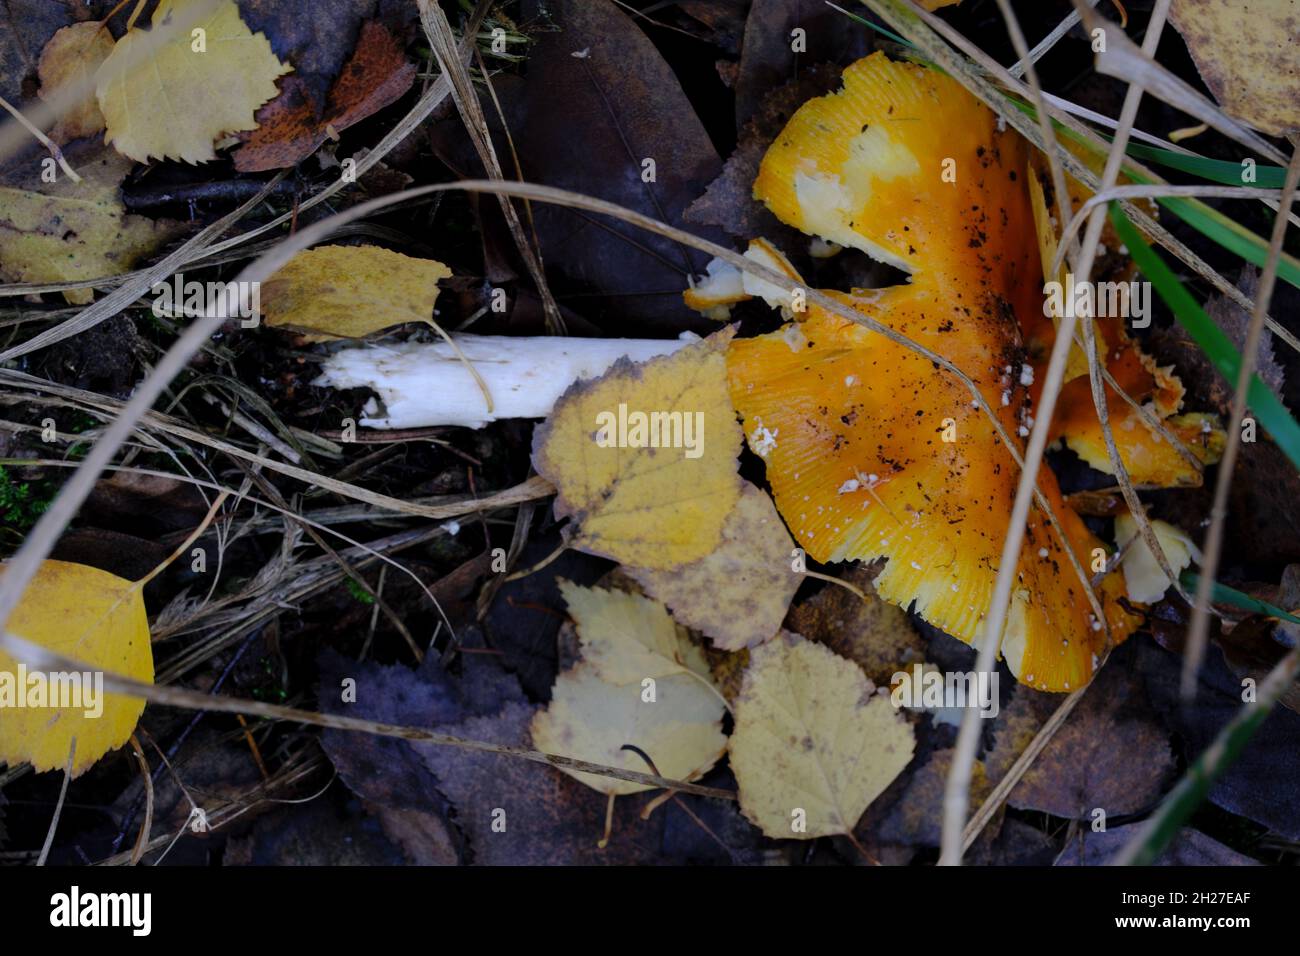 Old fly amanita mushroom (Amanita muscaria) undergoing decay surrounded by vegetation in autumn forest Stock Photo